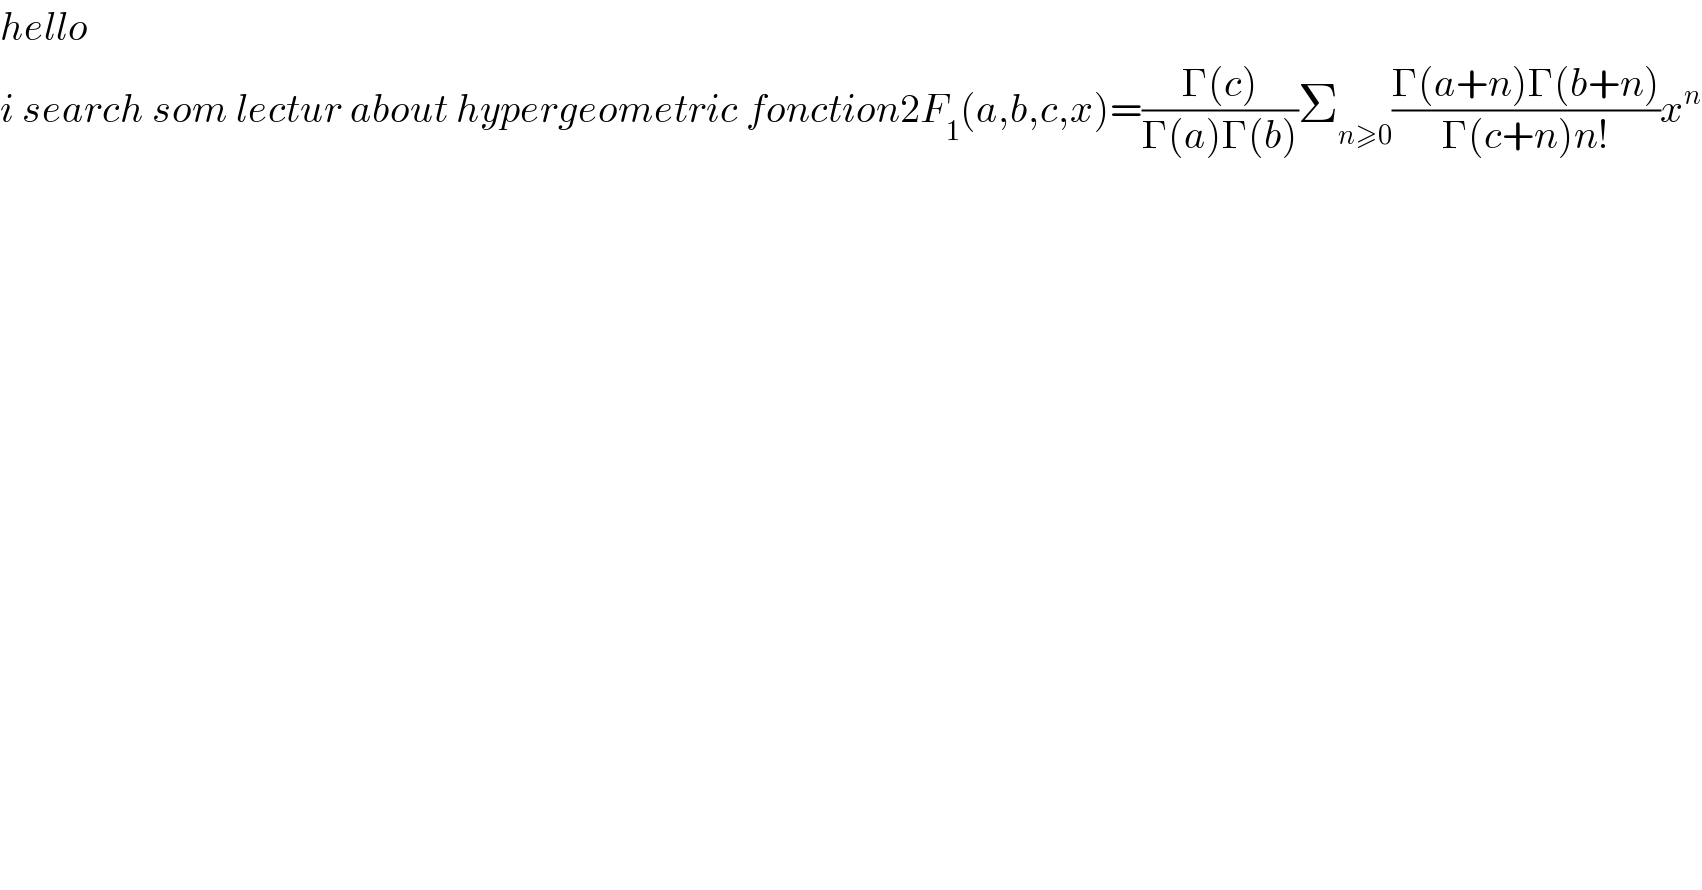 hello  i search som lectur about hypergeometric fonction2F_1 (a,b,c,x)=((Γ(c))/(Γ(a)Γ(b)))Σ_(n≥0) ((Γ(a+n)Γ(b+n))/(Γ(c+n)n!))x^n     